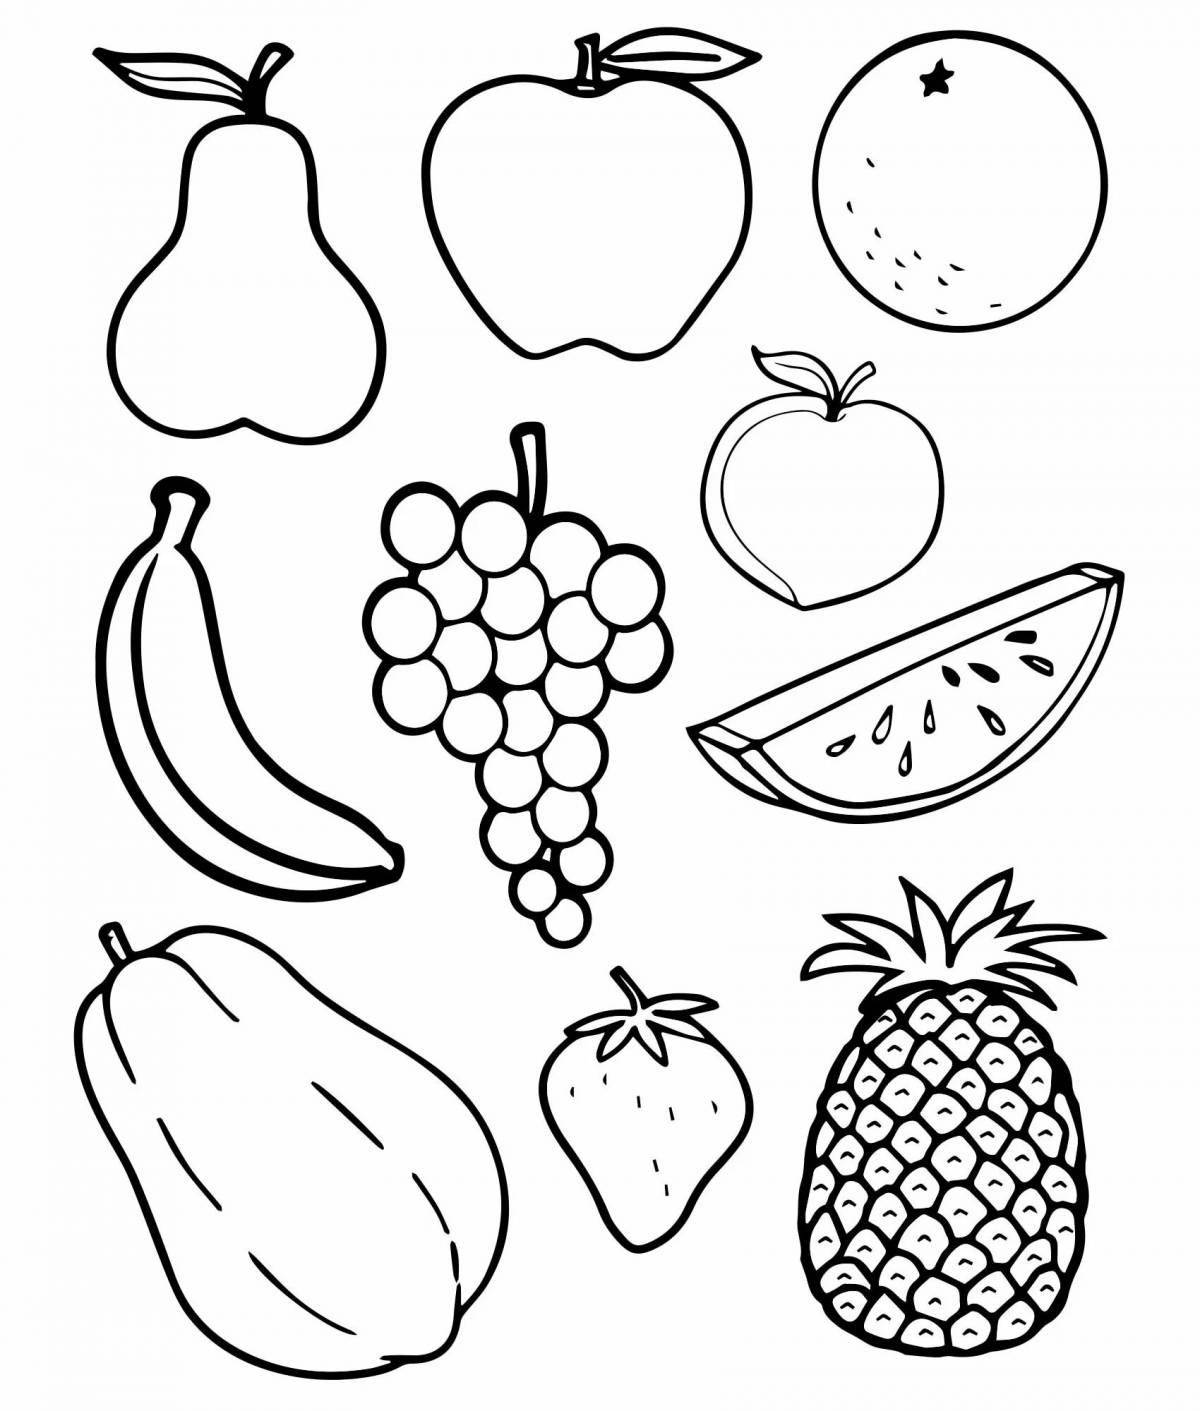 Coloring book dazzling fruit for little students